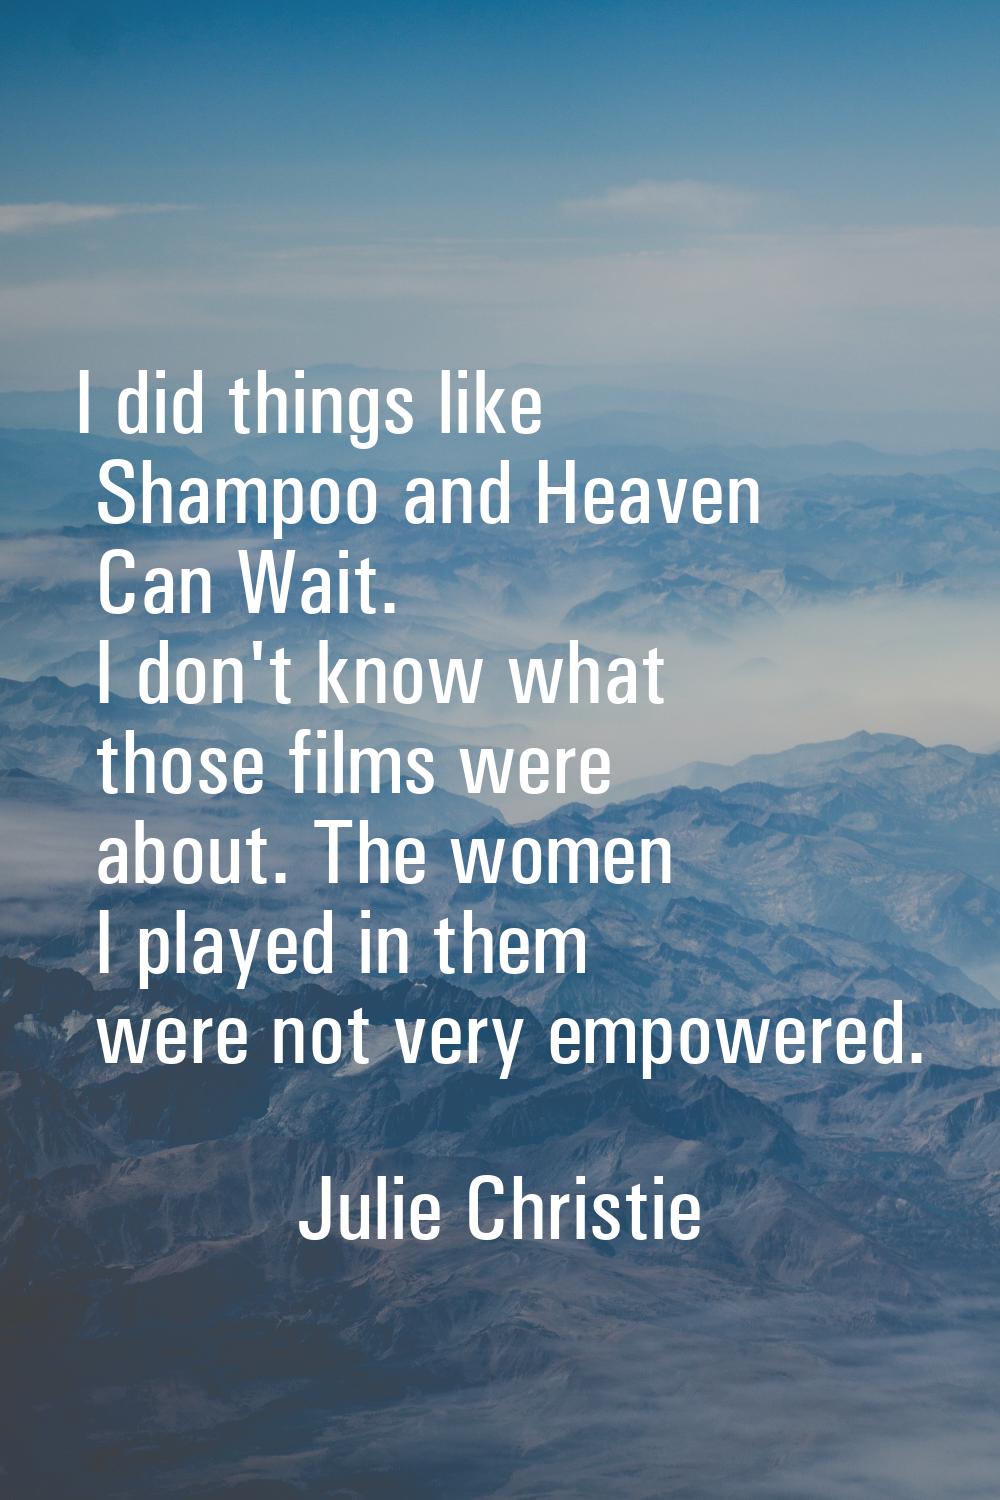 I did things like Shampoo and Heaven Can Wait. I don't know what those films were about. The women 